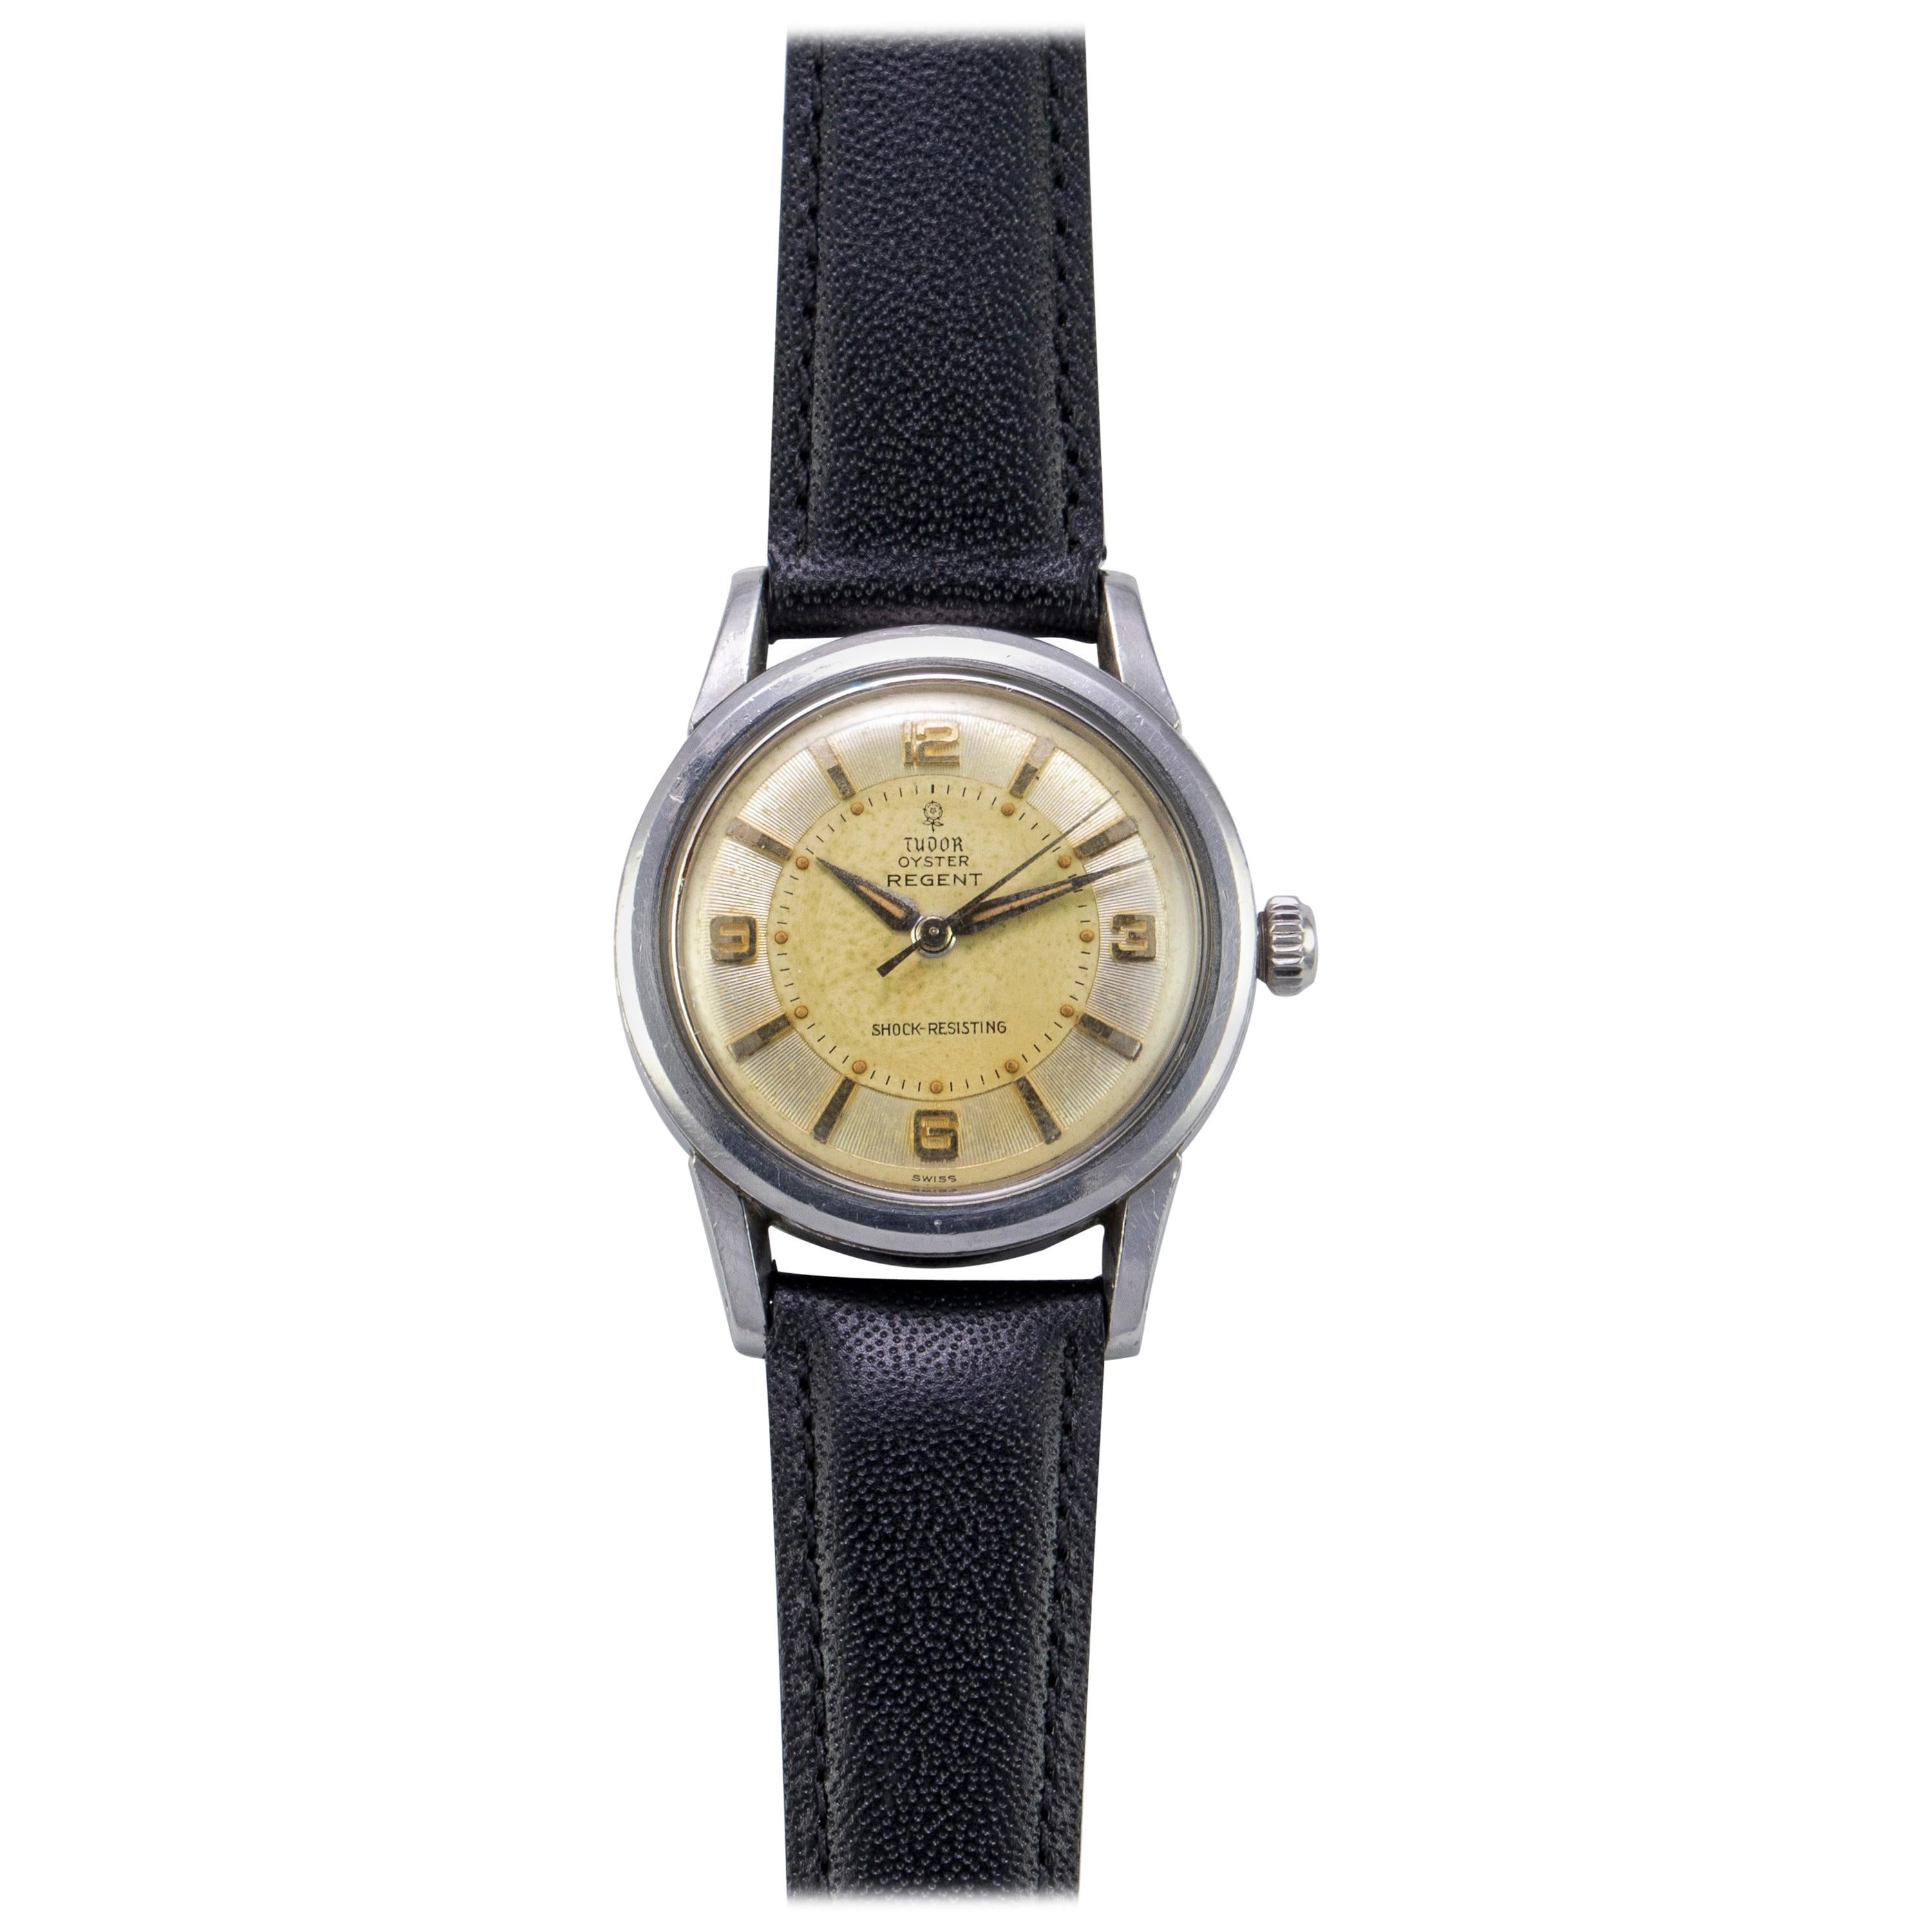 Tudor Stainless Steel Oyster Regent Manual Wind Wristwatch, 1960s For Sale